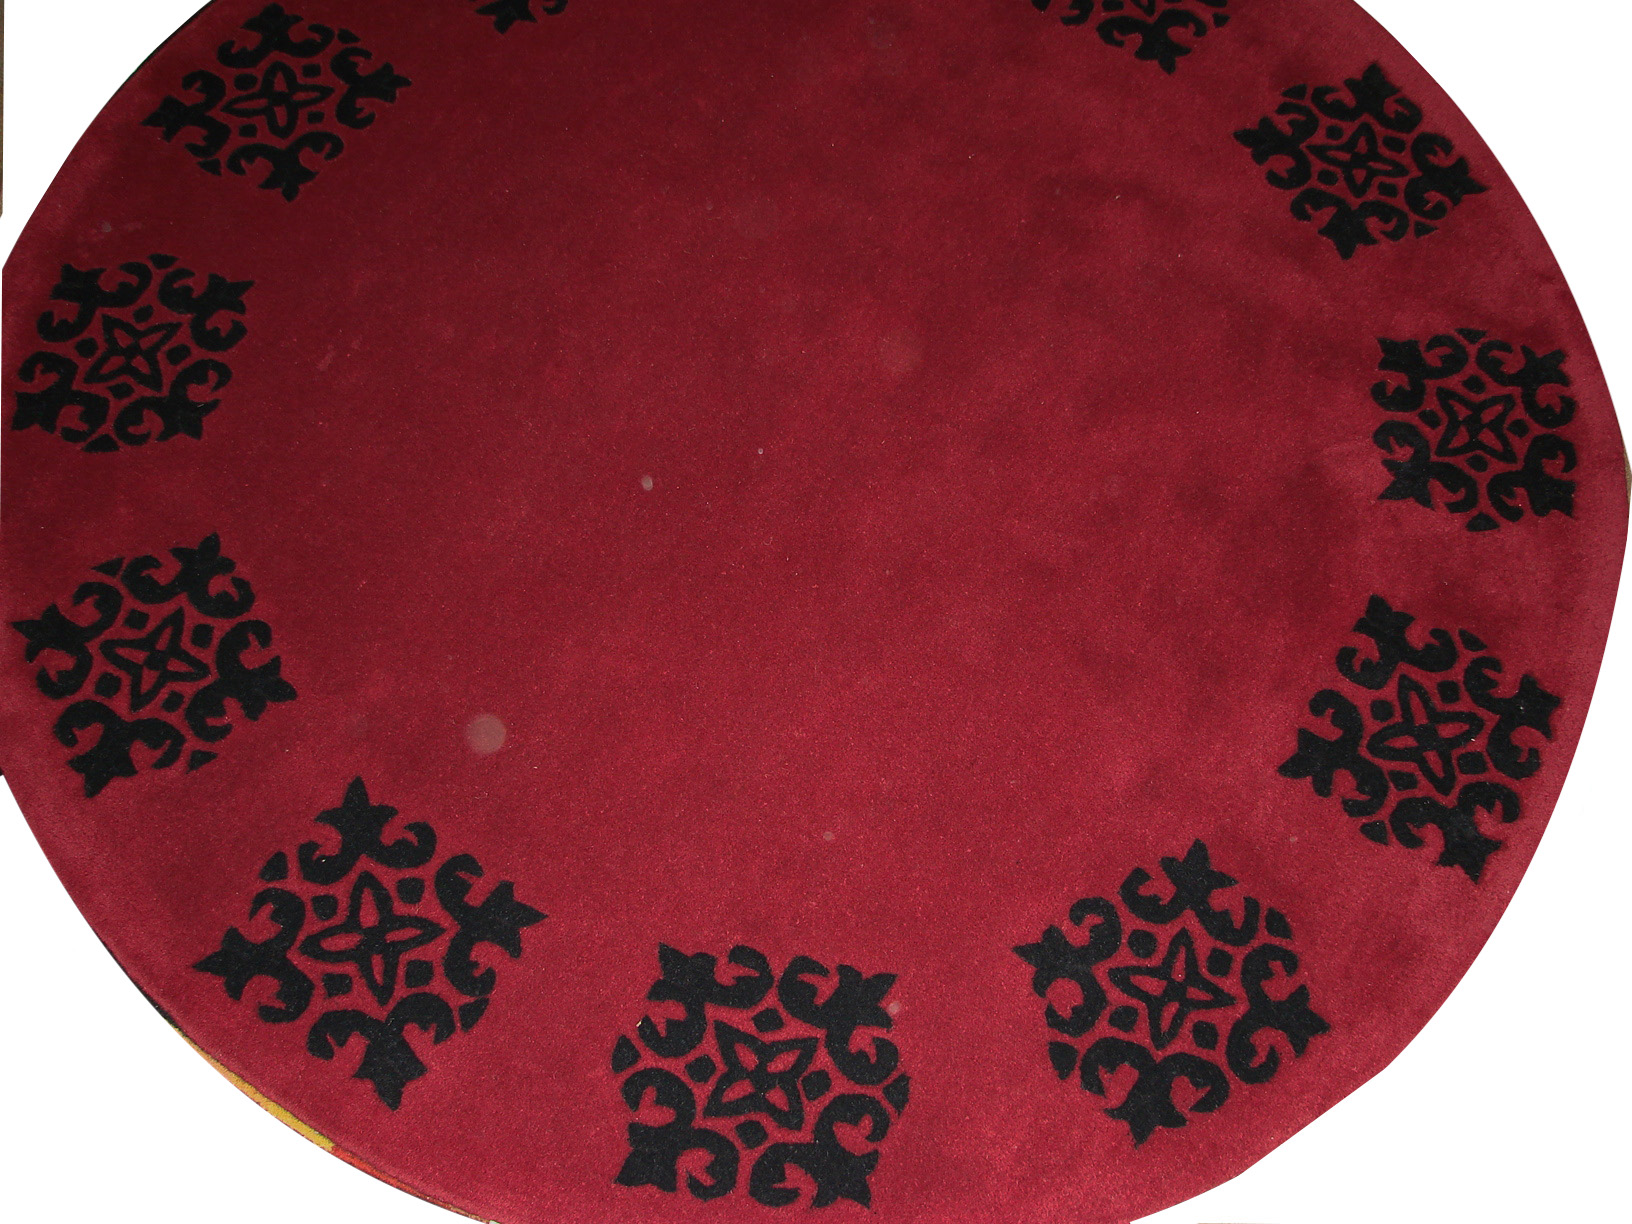 Clearance & Discount Rugs C-91-1 - 6"-Round 0854 Red - Burgundy & Black - Charcoal Hand Tufted Rug